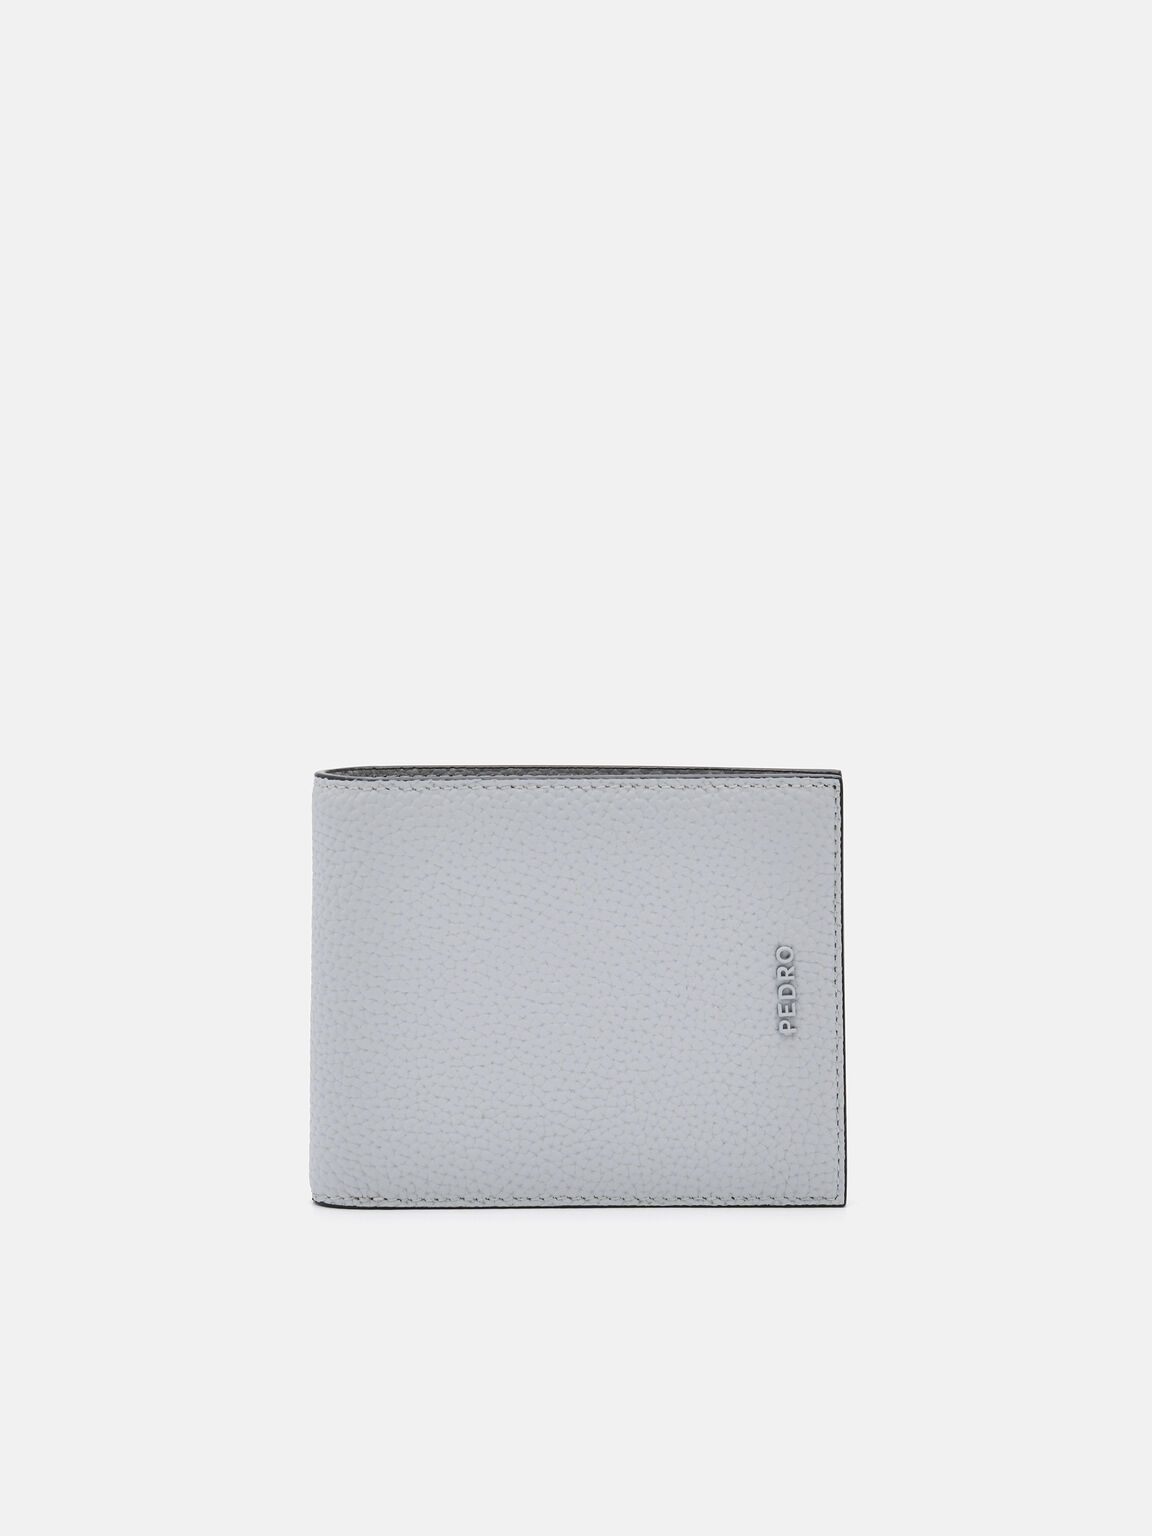 Embossed Leather Bi-Fold Wallet with Insert, Light Grey, hi-res